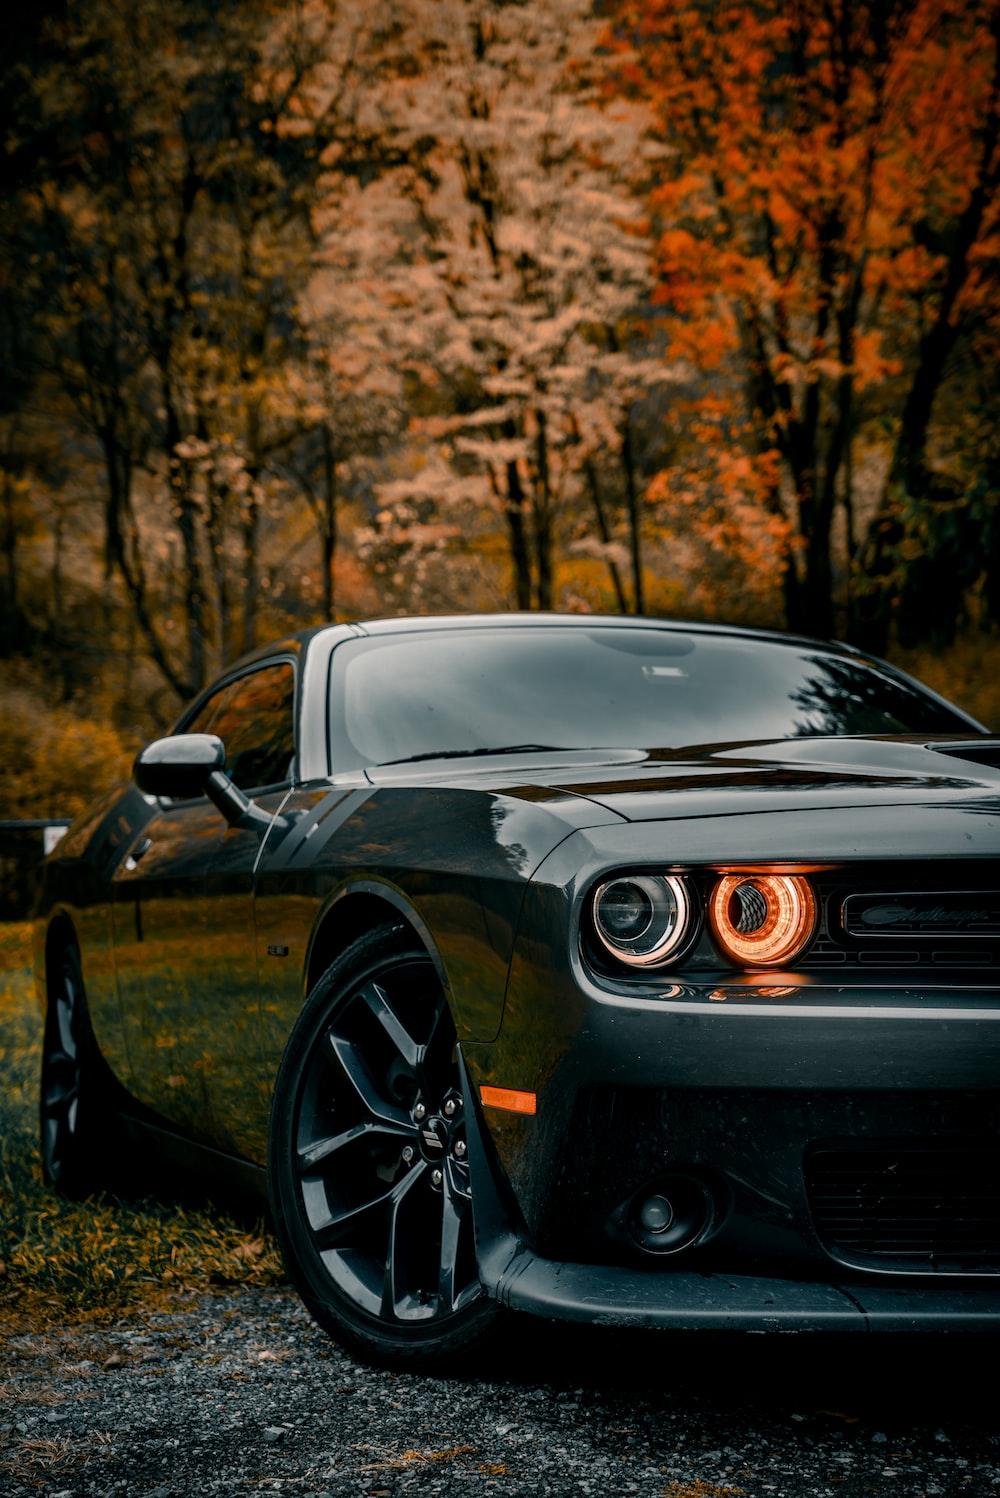 1000 Dodge Challenger Pictures Download Free Images on